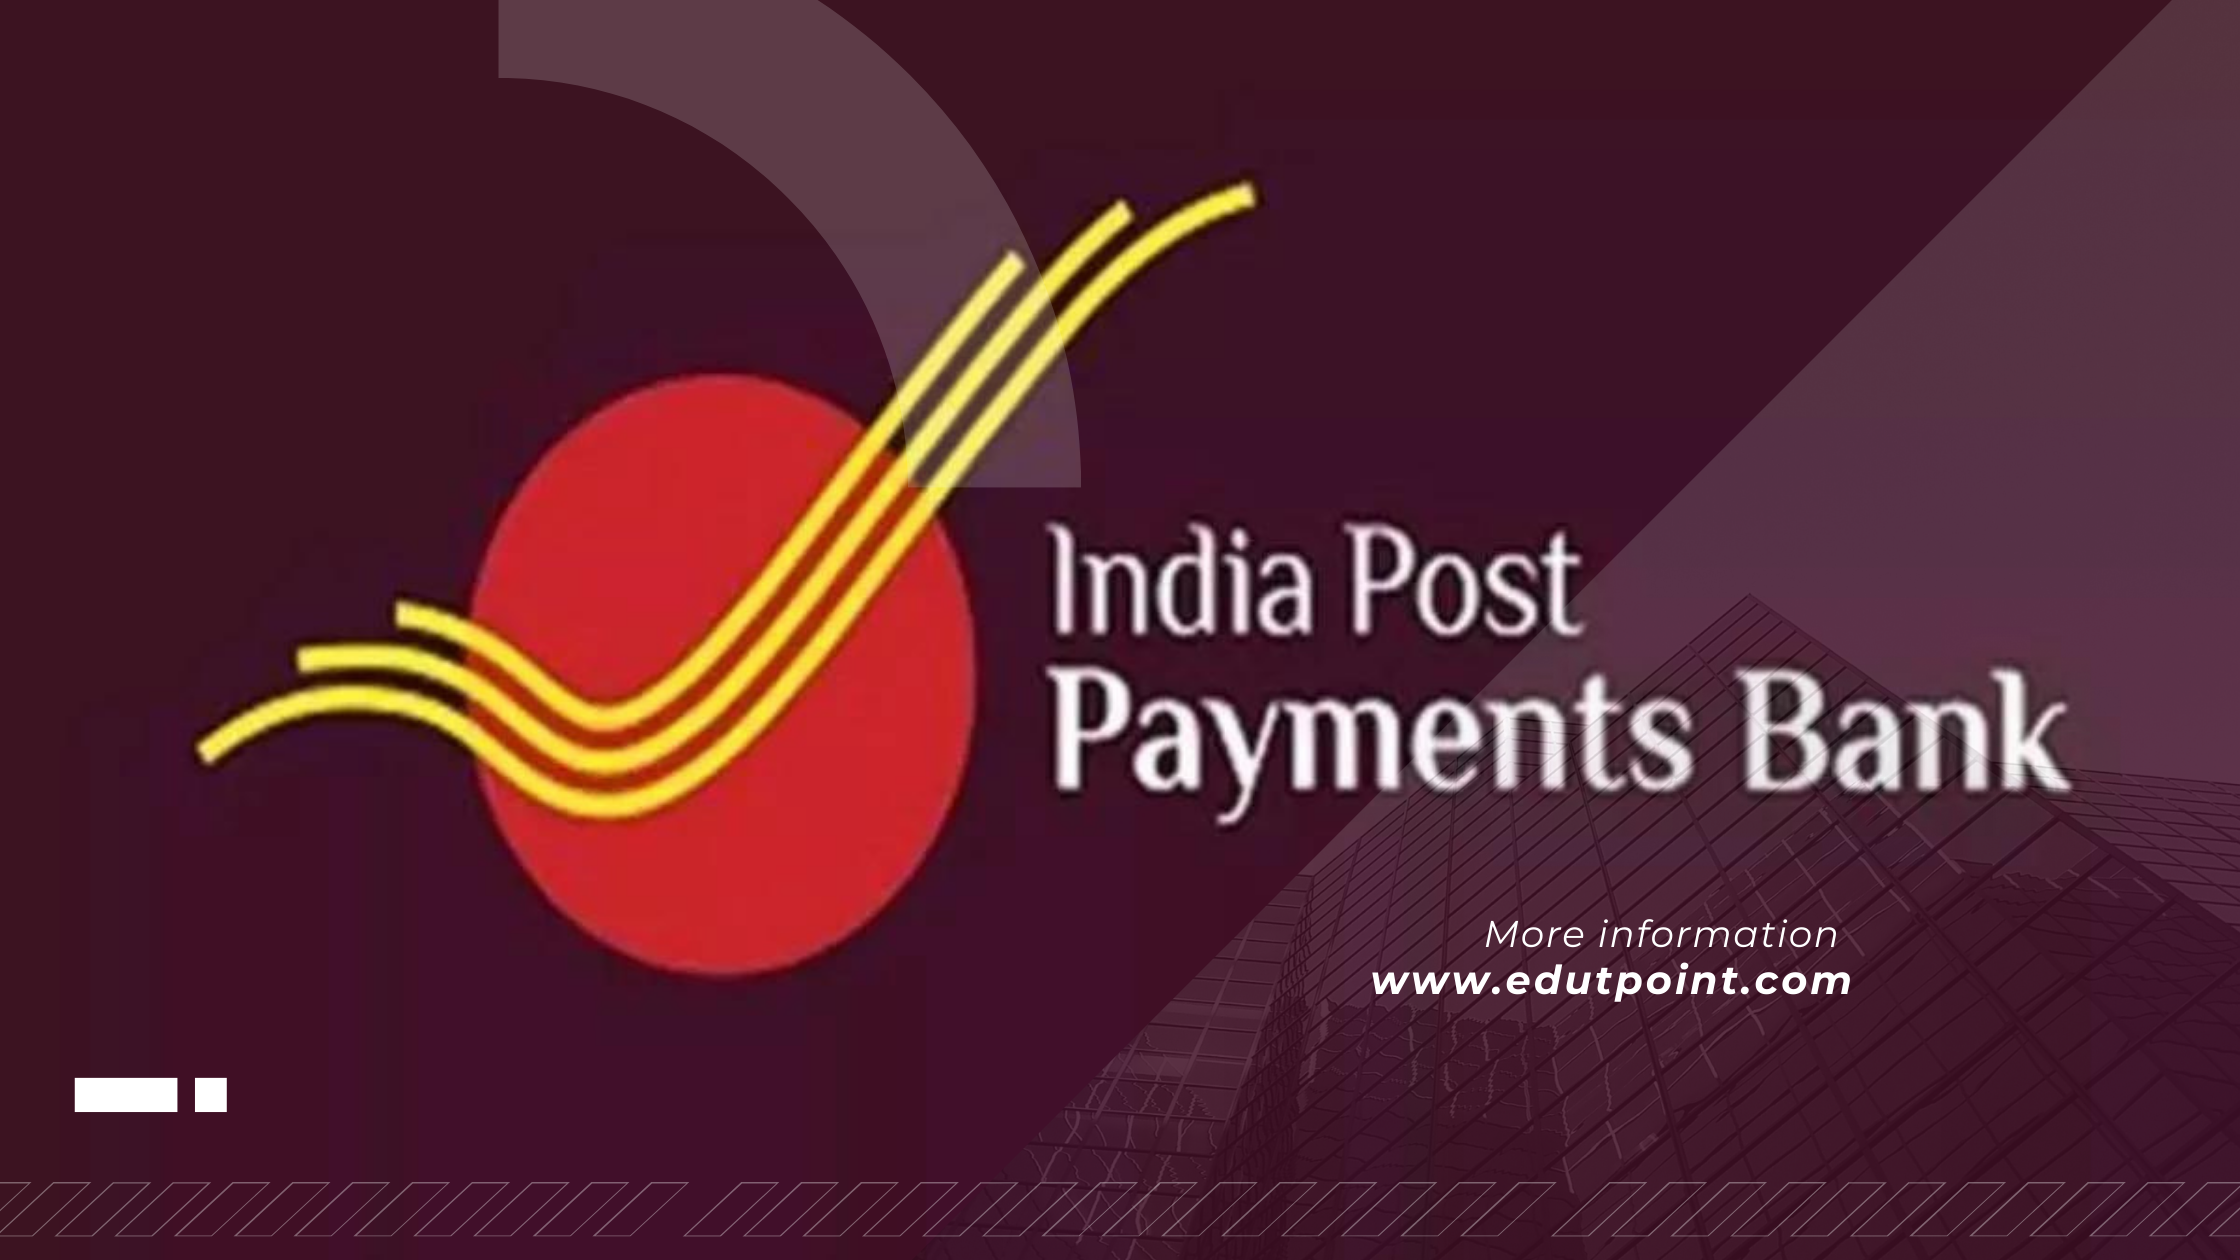 IPPB Recruitment 2023: India Post Payments Bank has released recruitment for Manager and other posts